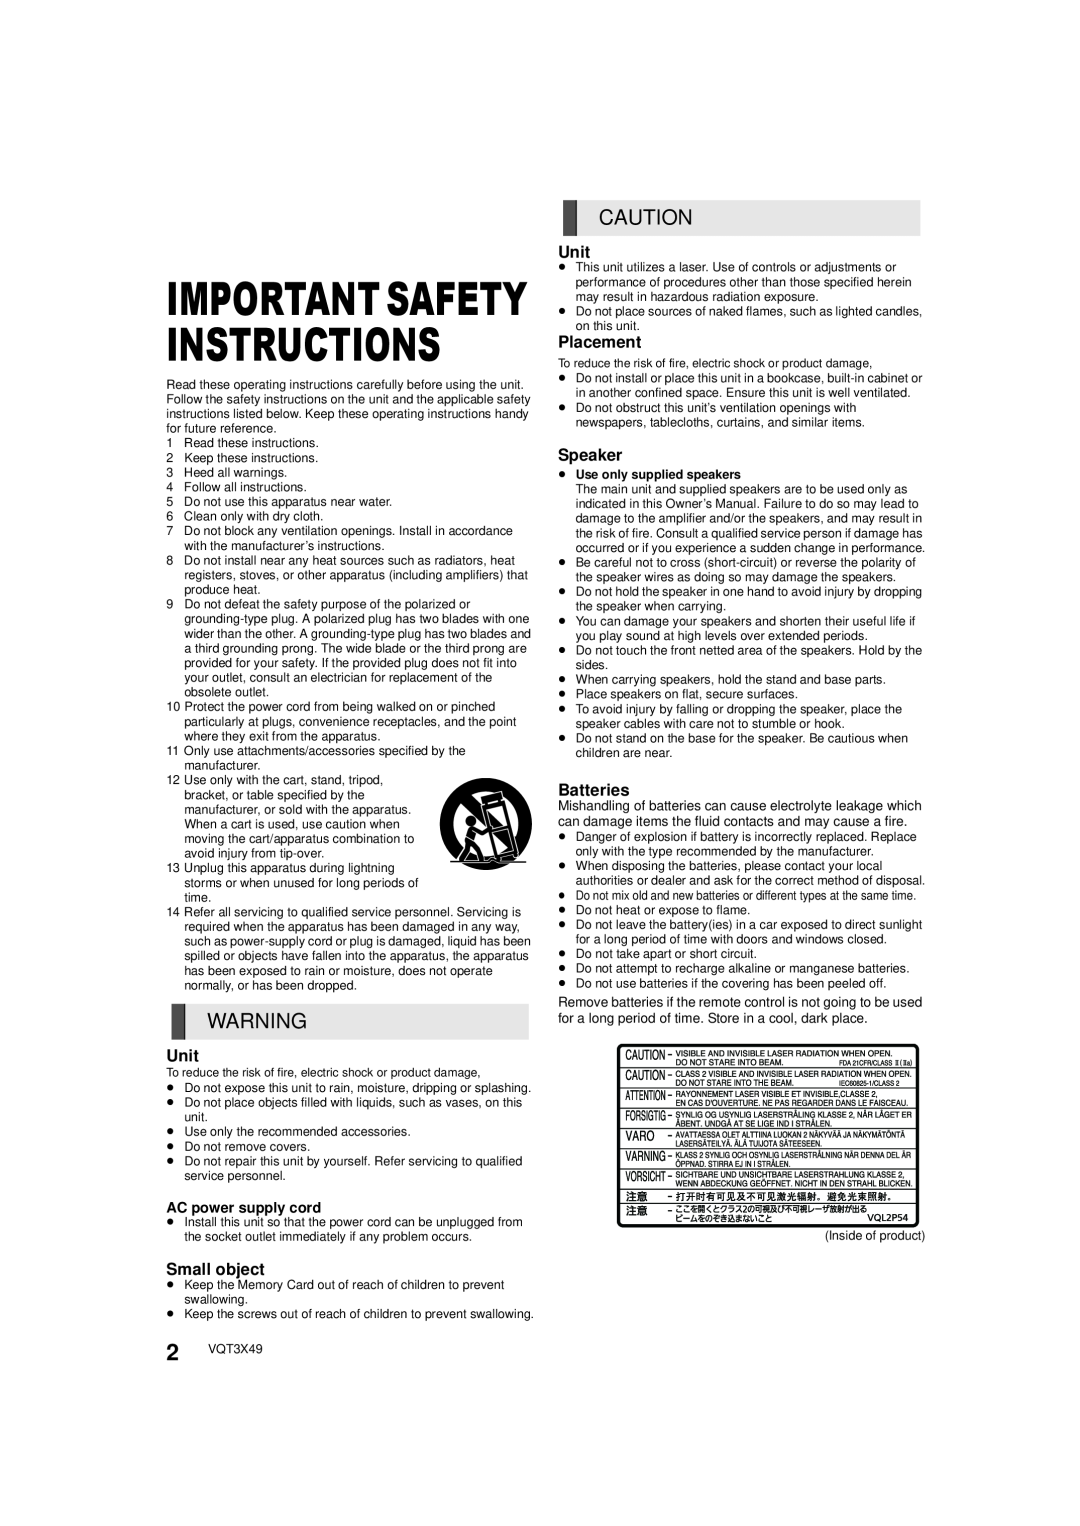 Panasonic SC-BTT490 Important Safety Instructions, Unit, Small object, Placement, Speaker, Batteries, AC power supply cord 